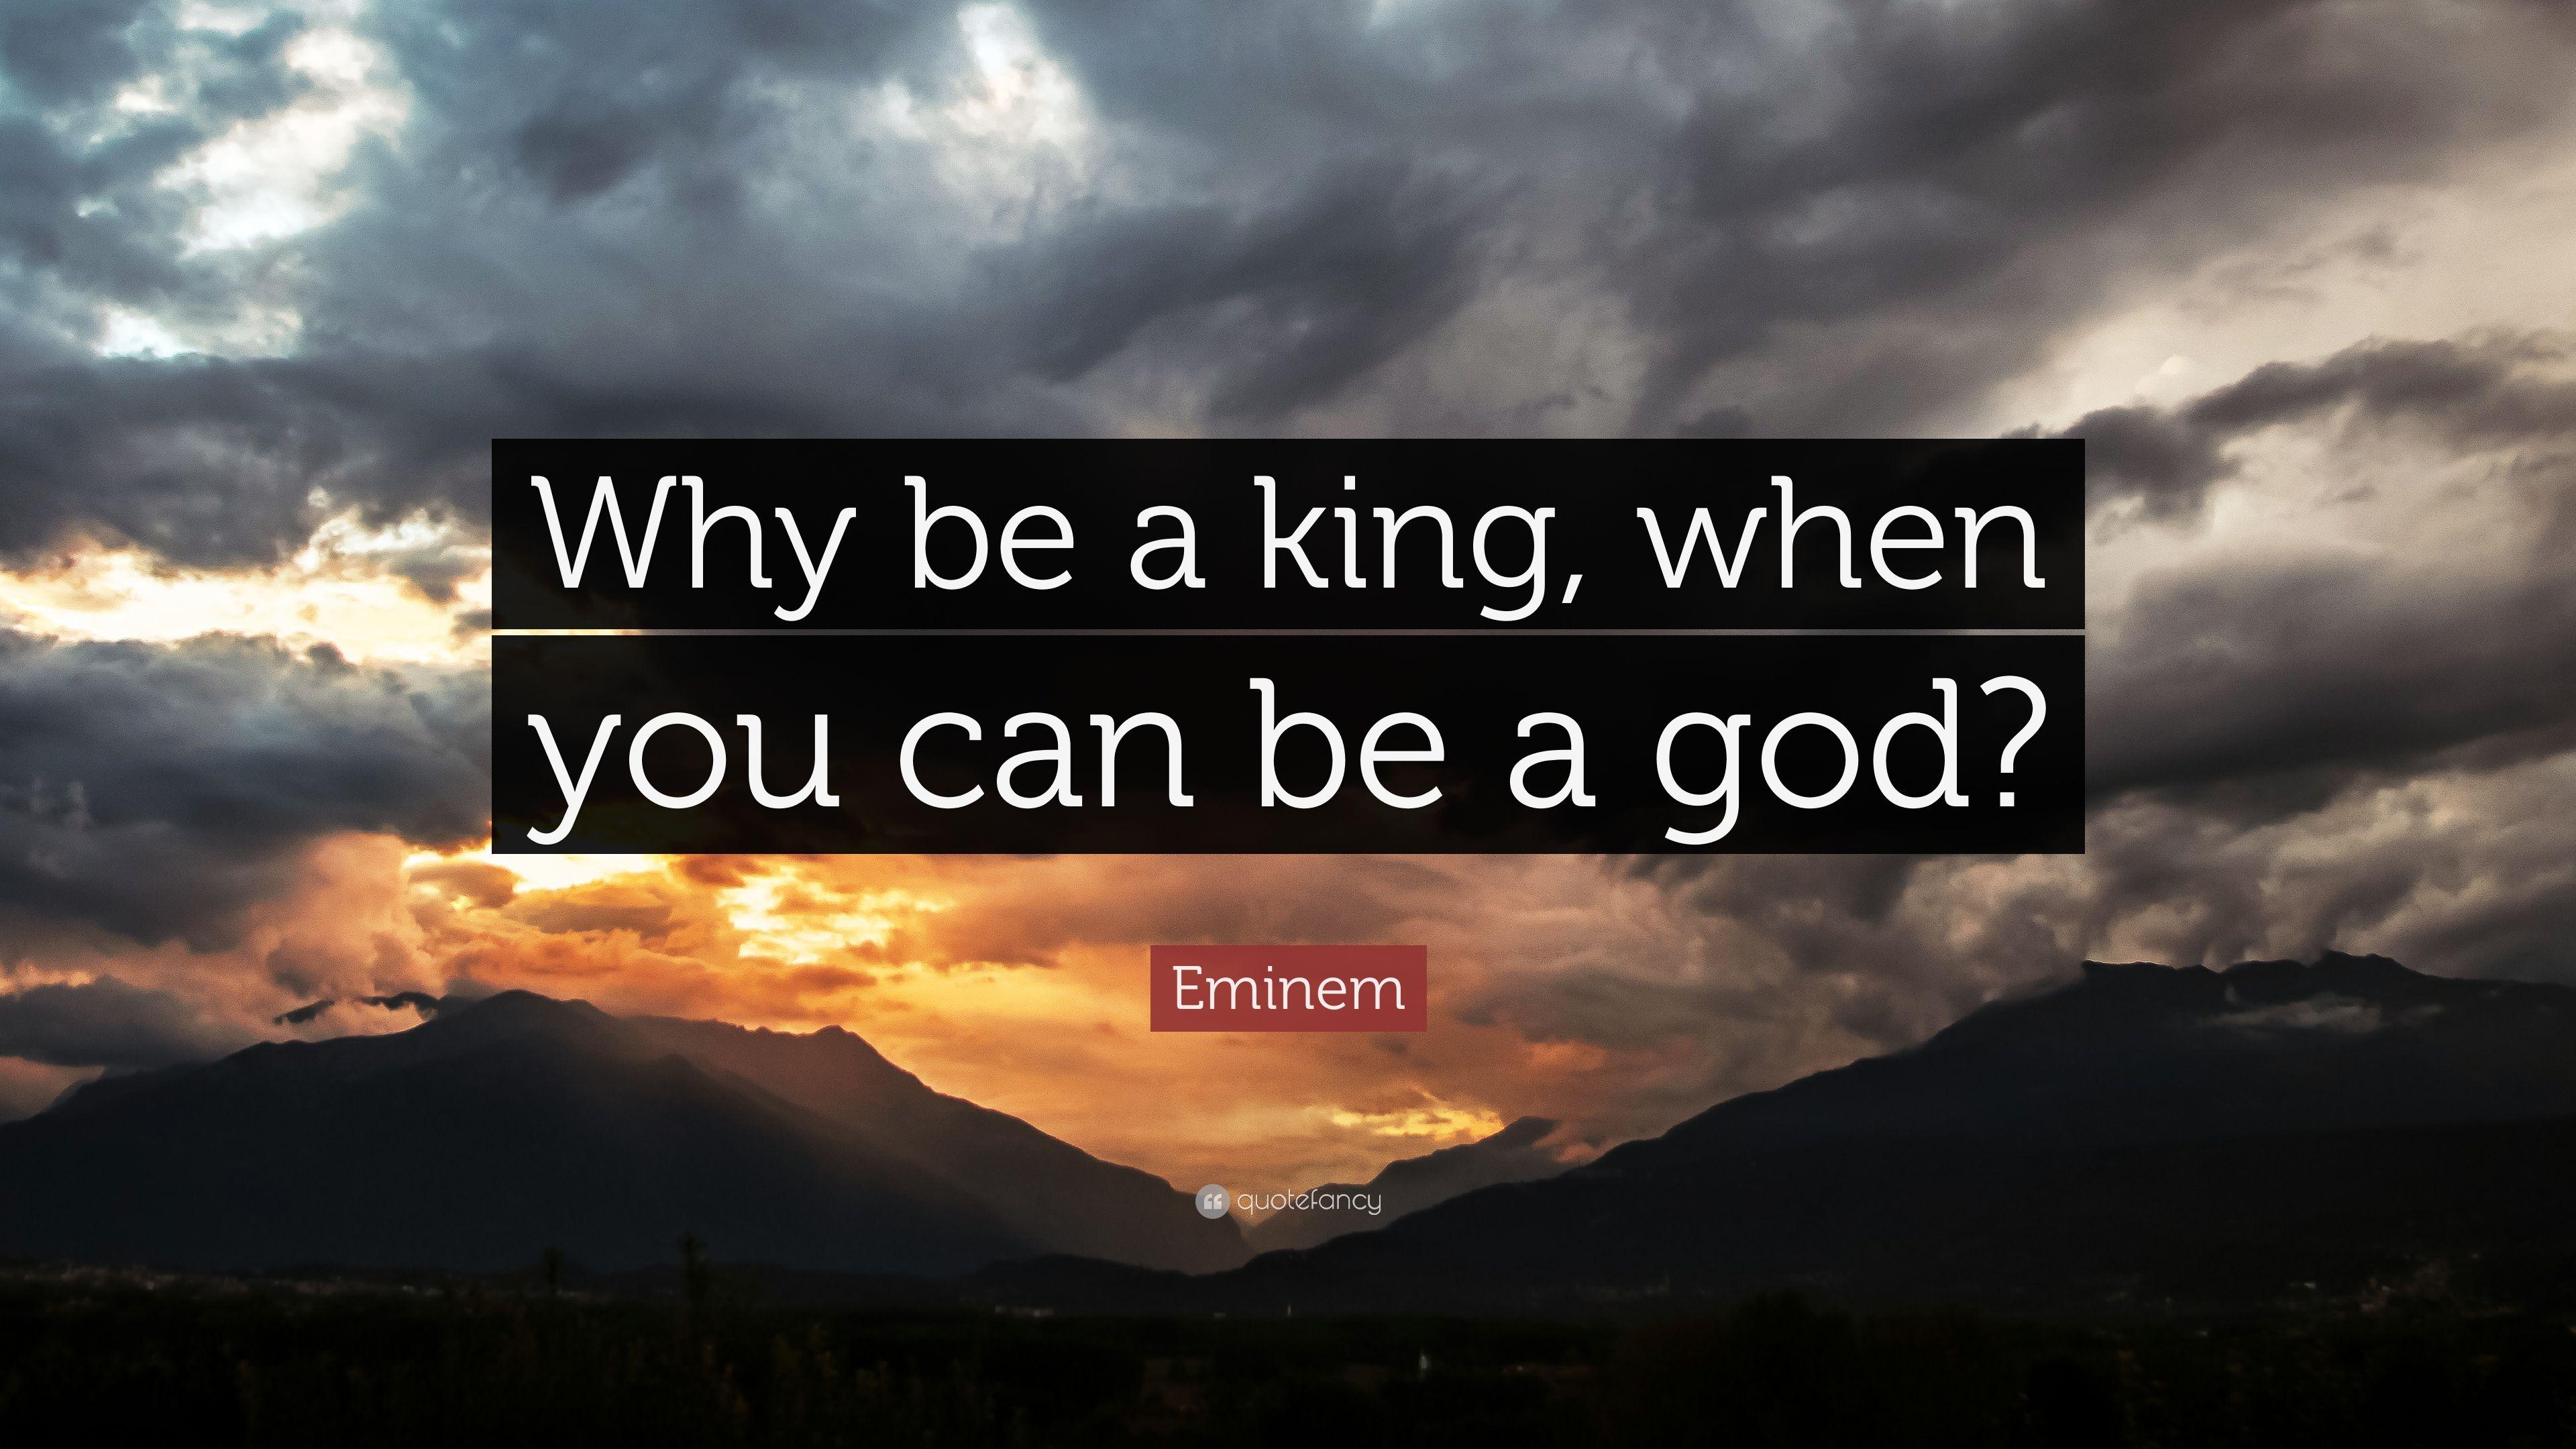 Eminem Quote: “Why be a king, when you can be a god?” 16